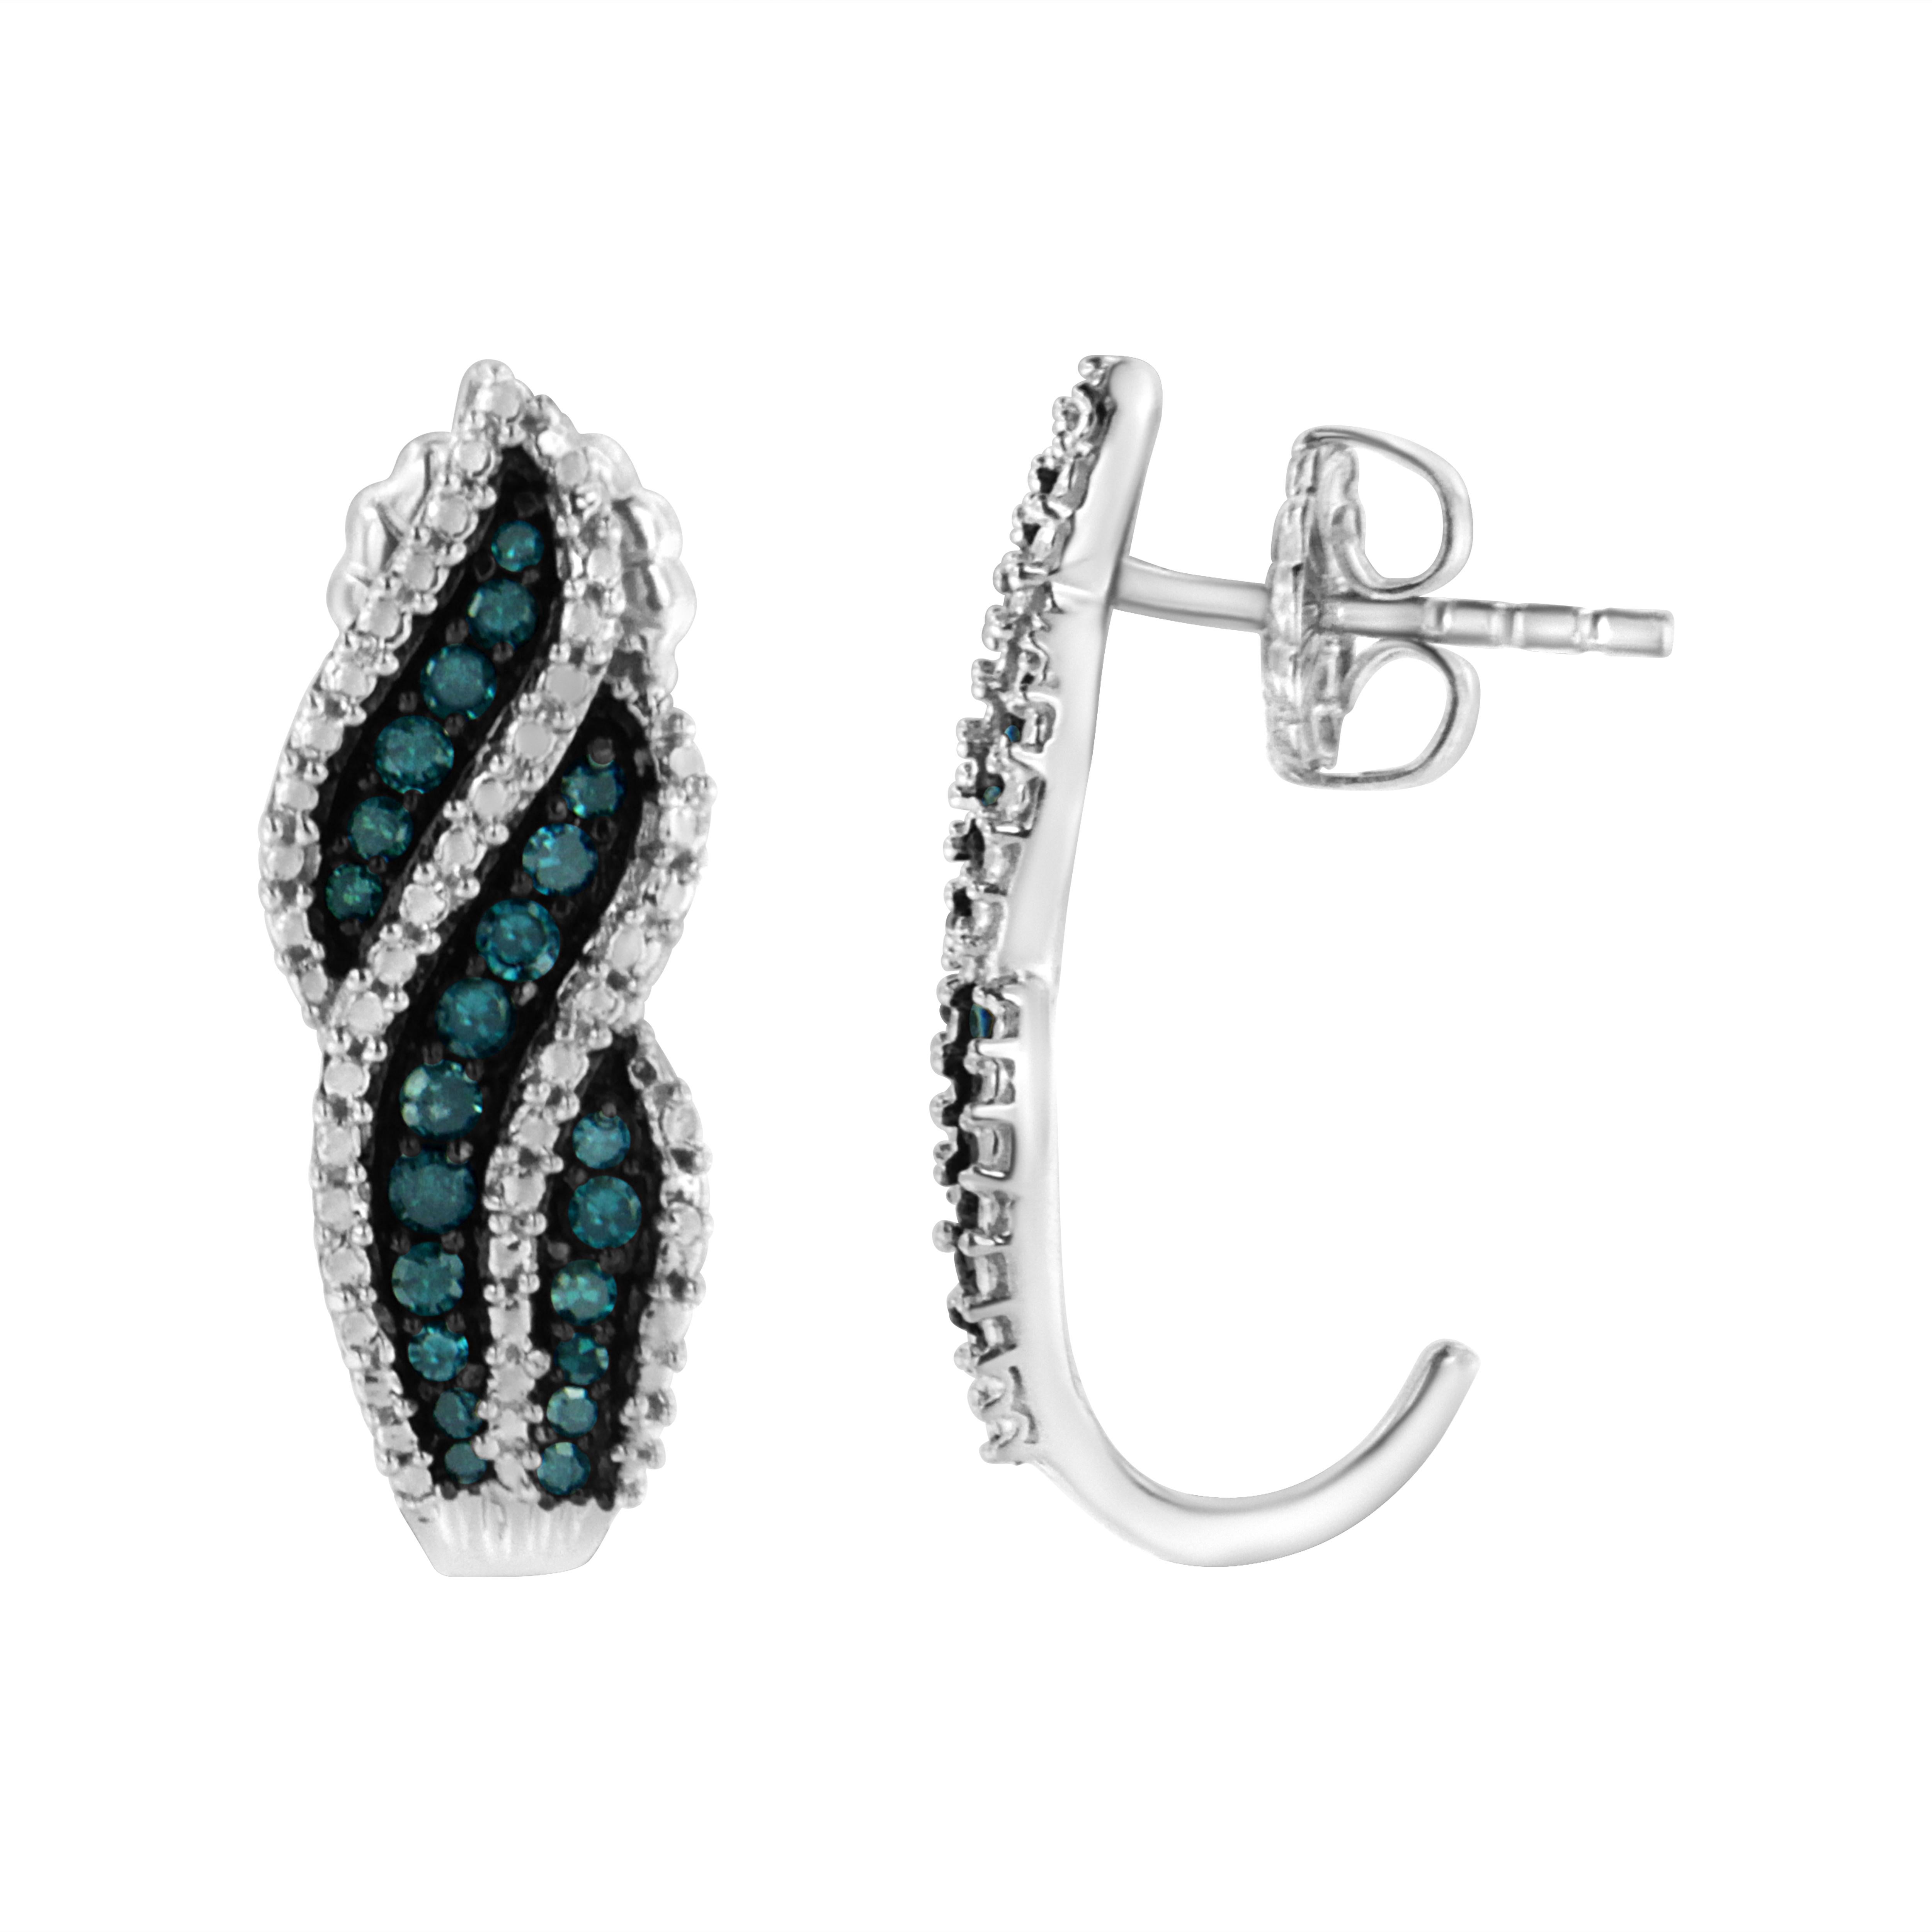 Dazzle all with these stunningly designed sterling silver diamond earrings. This gorgeous pair of dangling stud earrings is embellished with .50 carats of round-cut, treated blue diamonds in a prong setting. Each earring comes with a push back